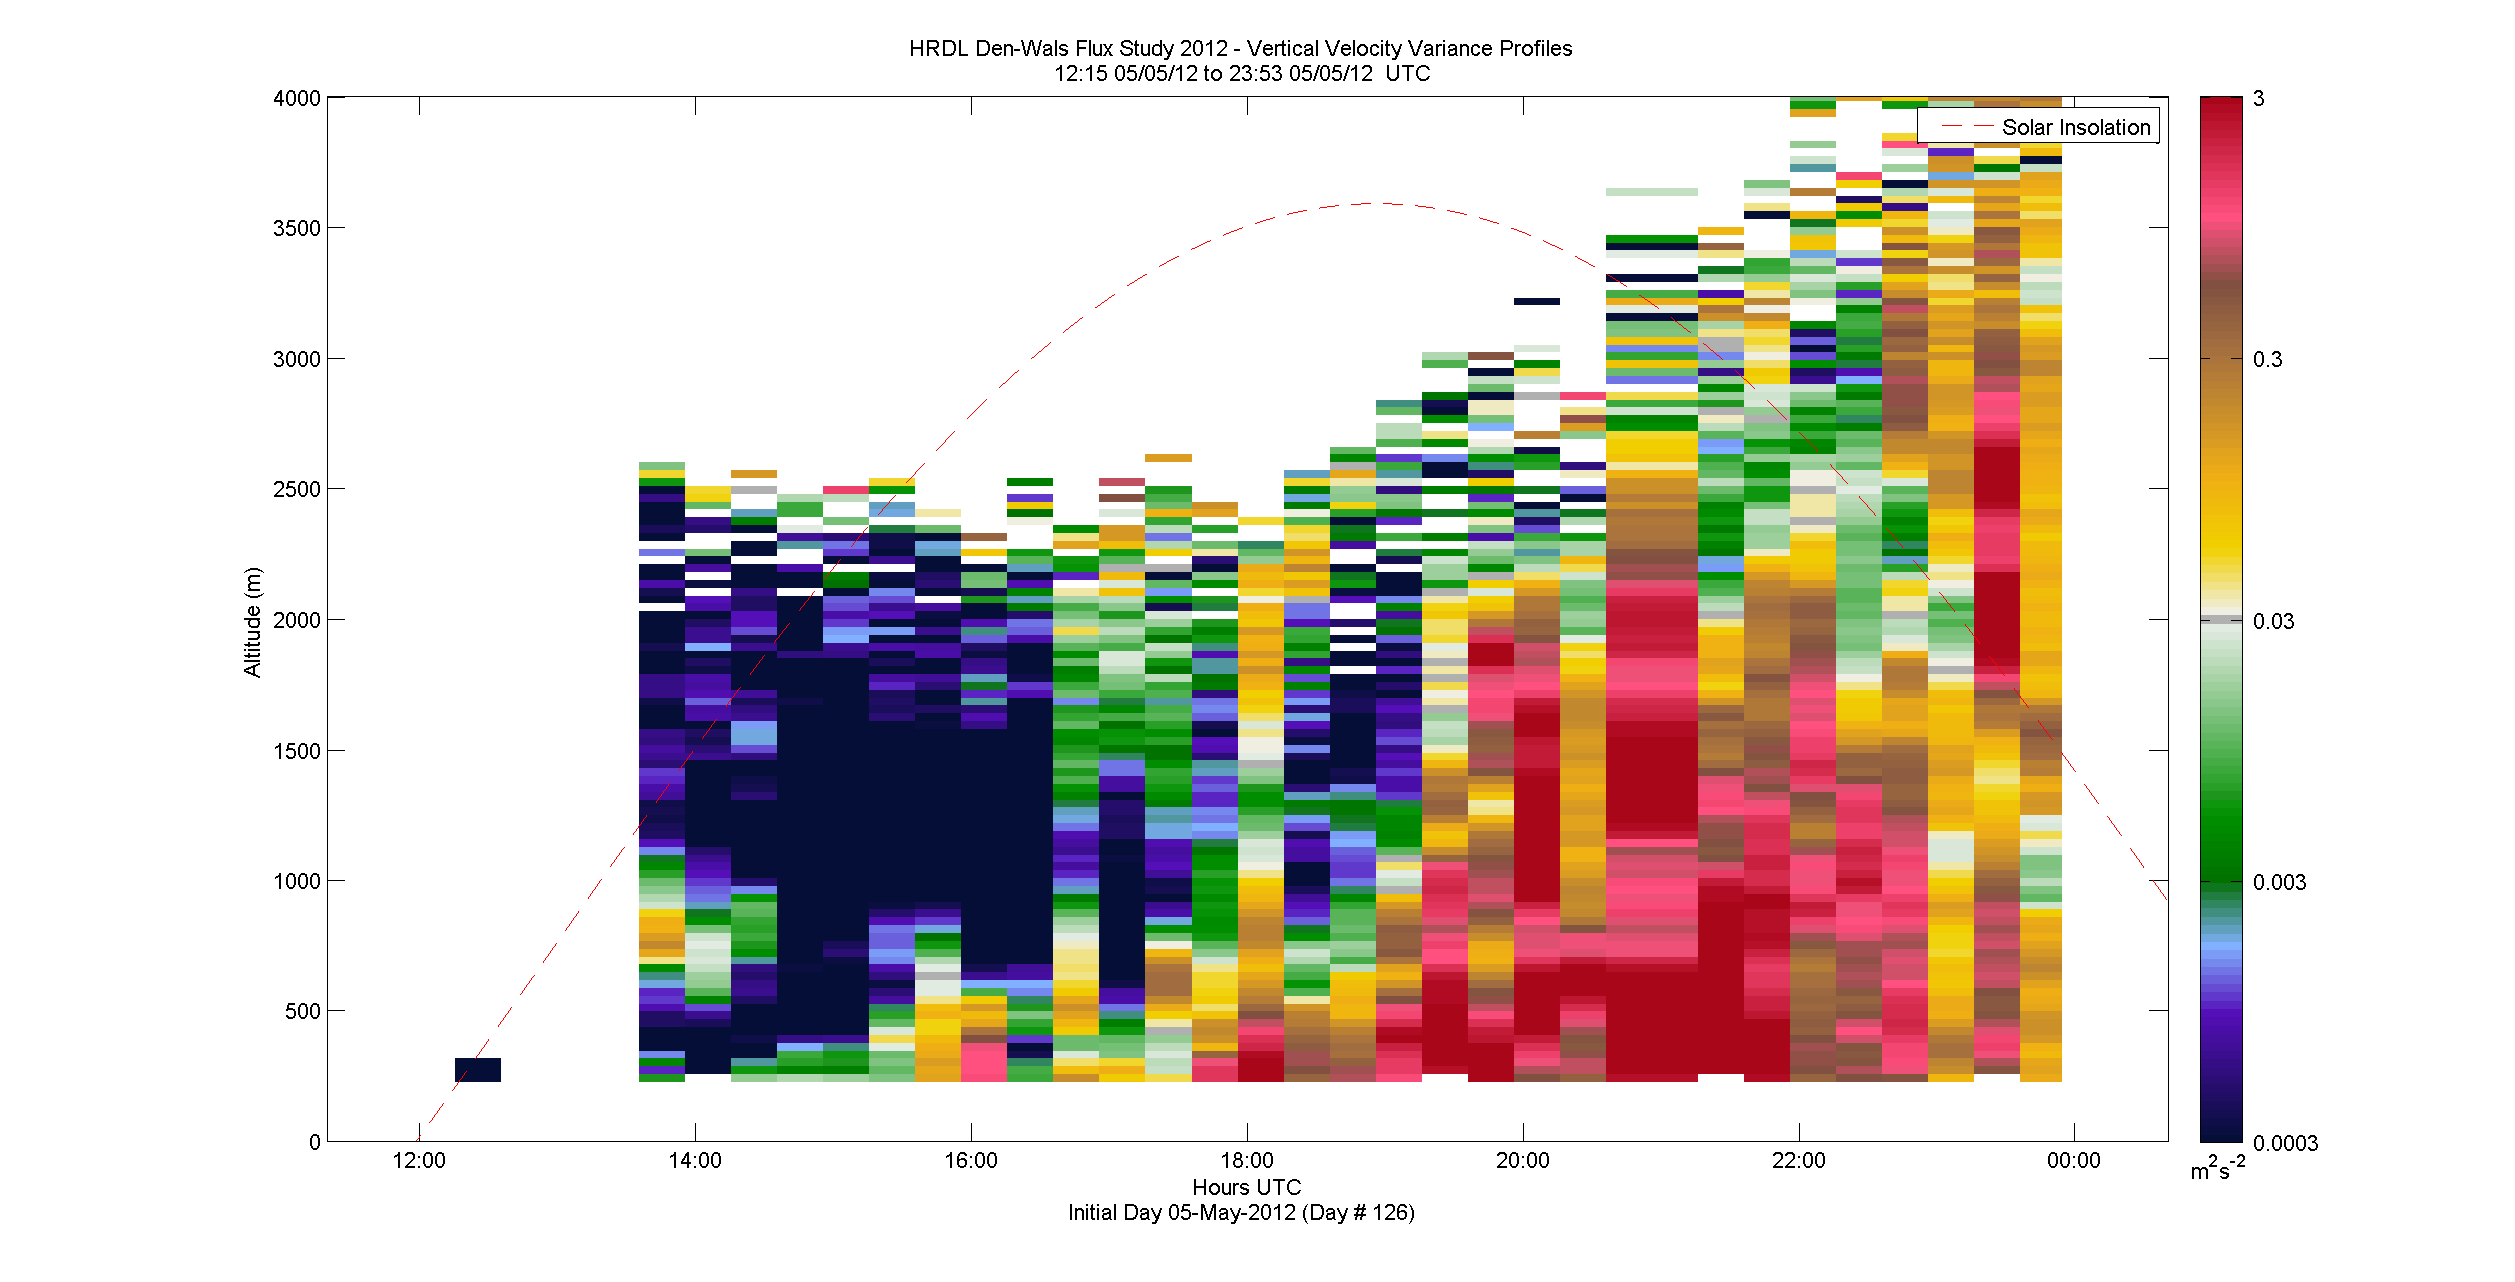 HRDL vertical variance profile - May 5 pm